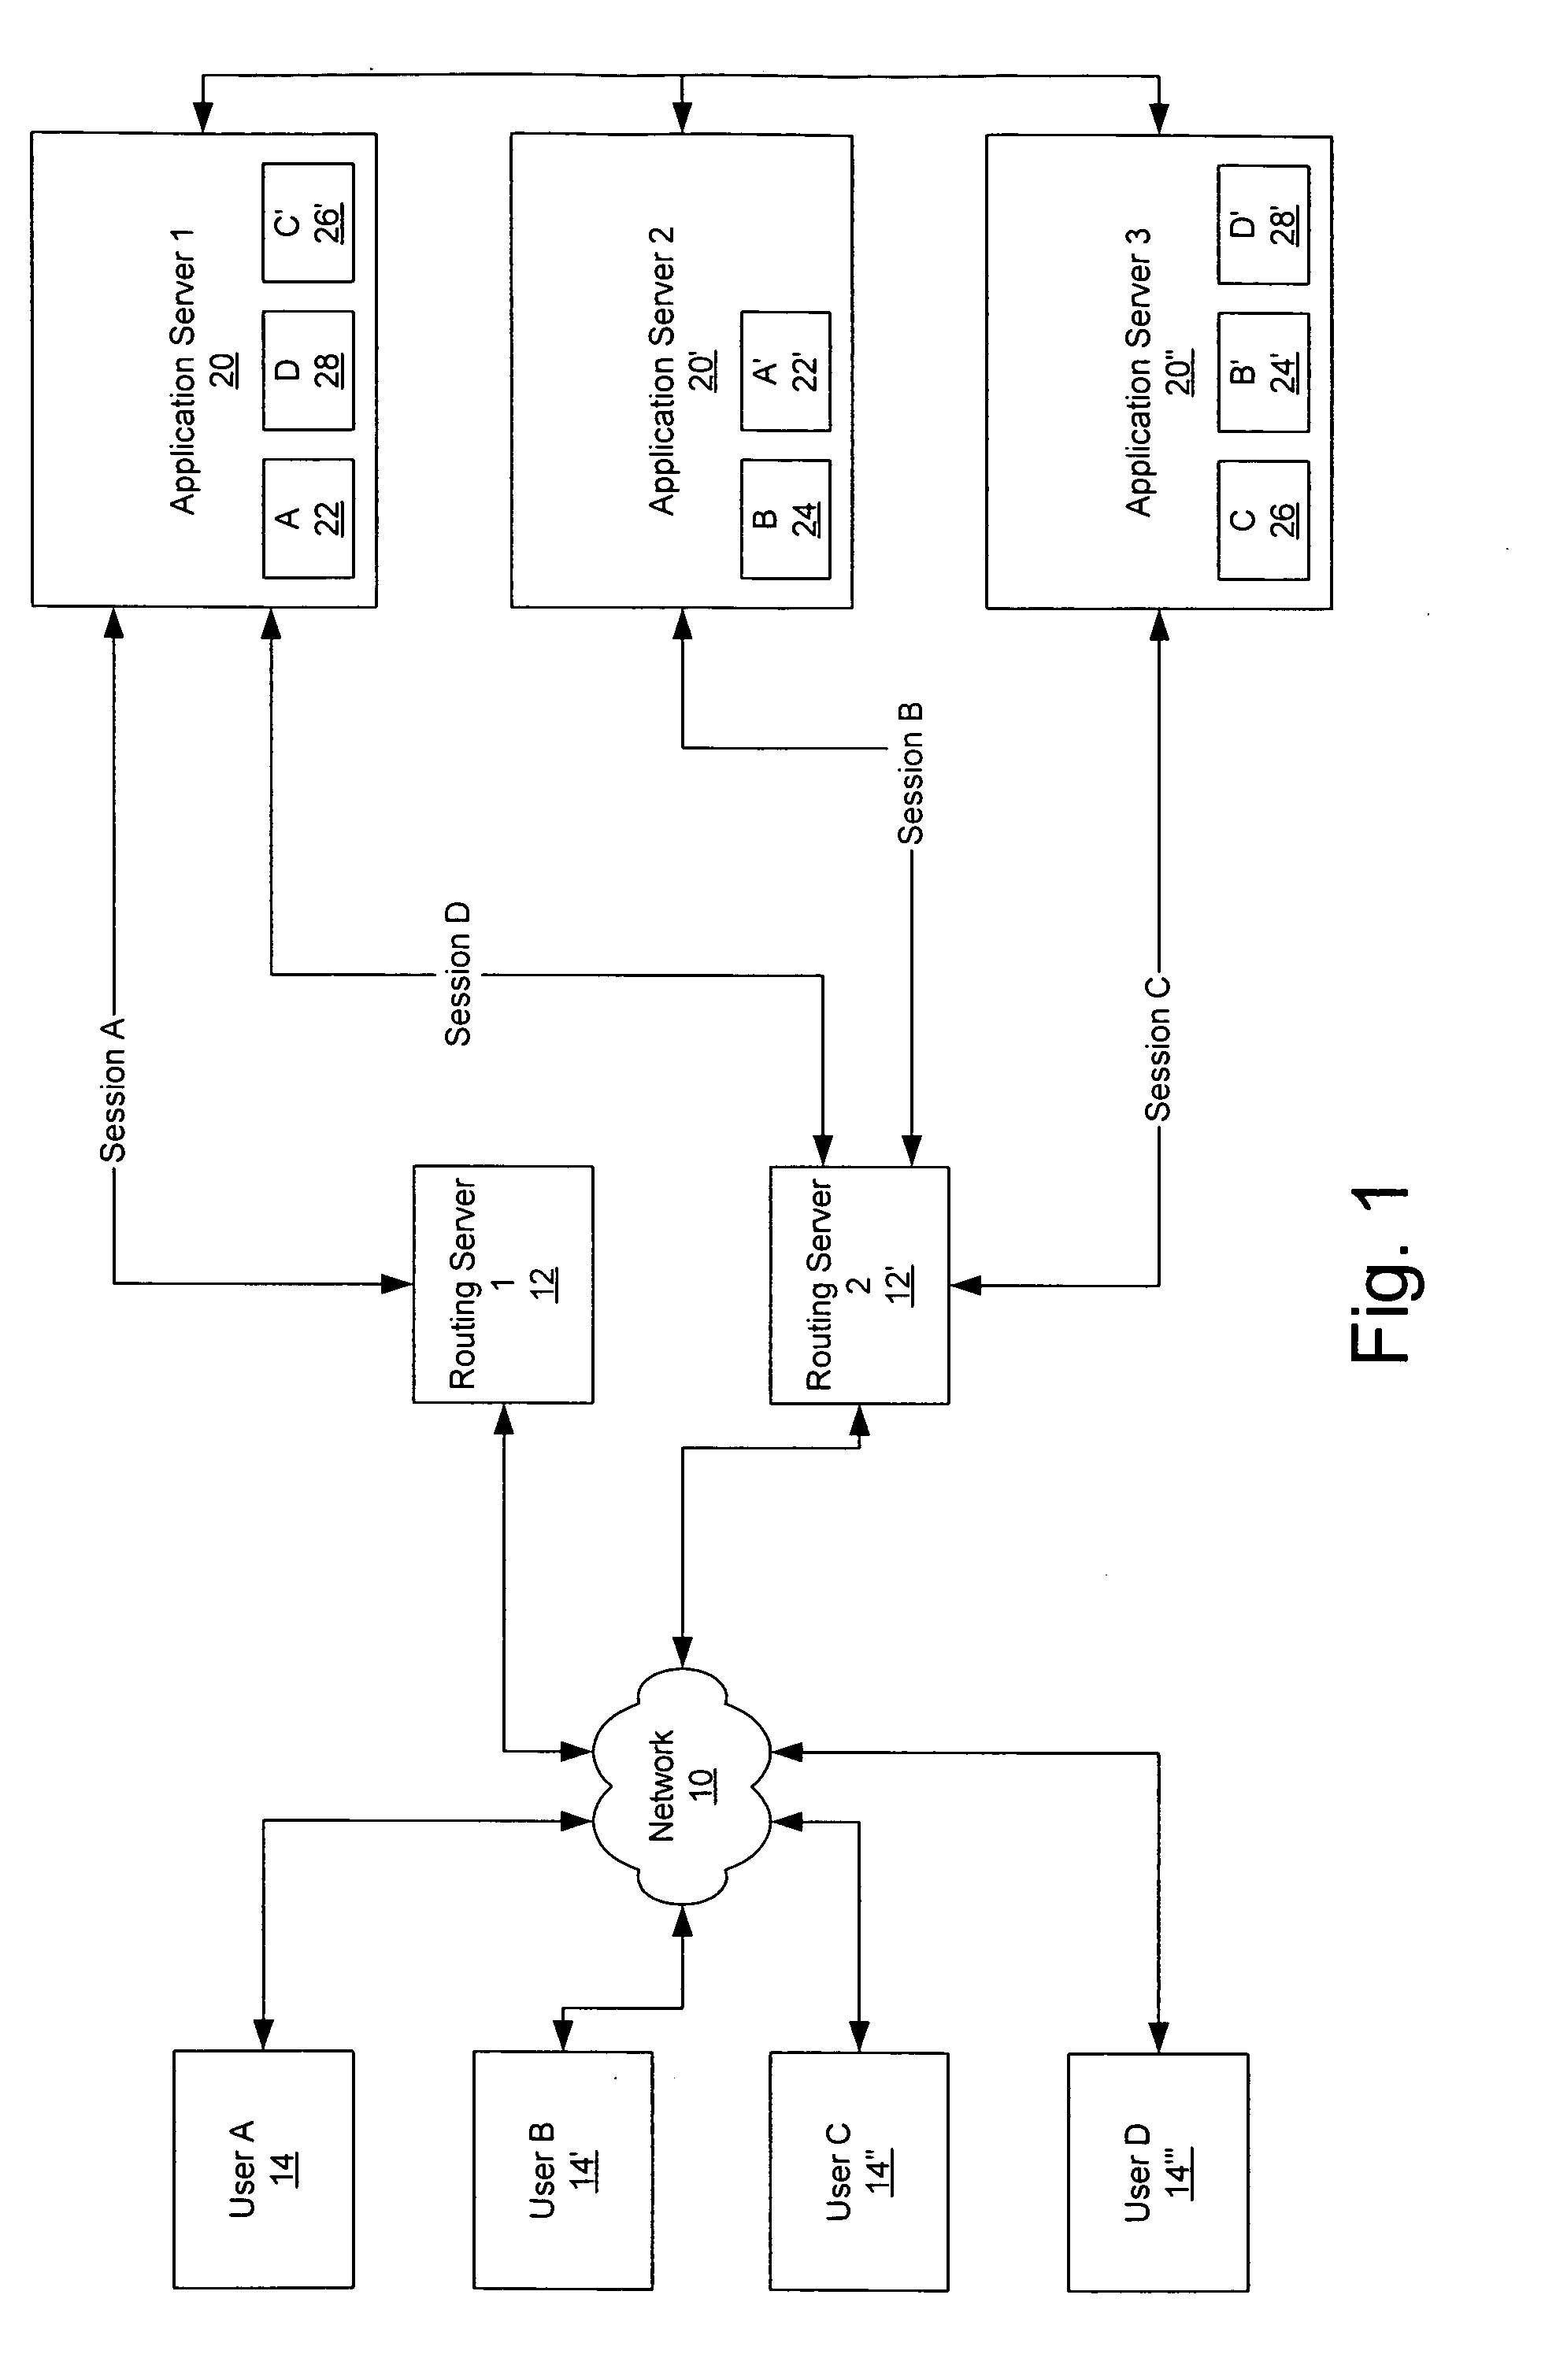 Methods, systems and computer program products for dynamically updating session state affinity